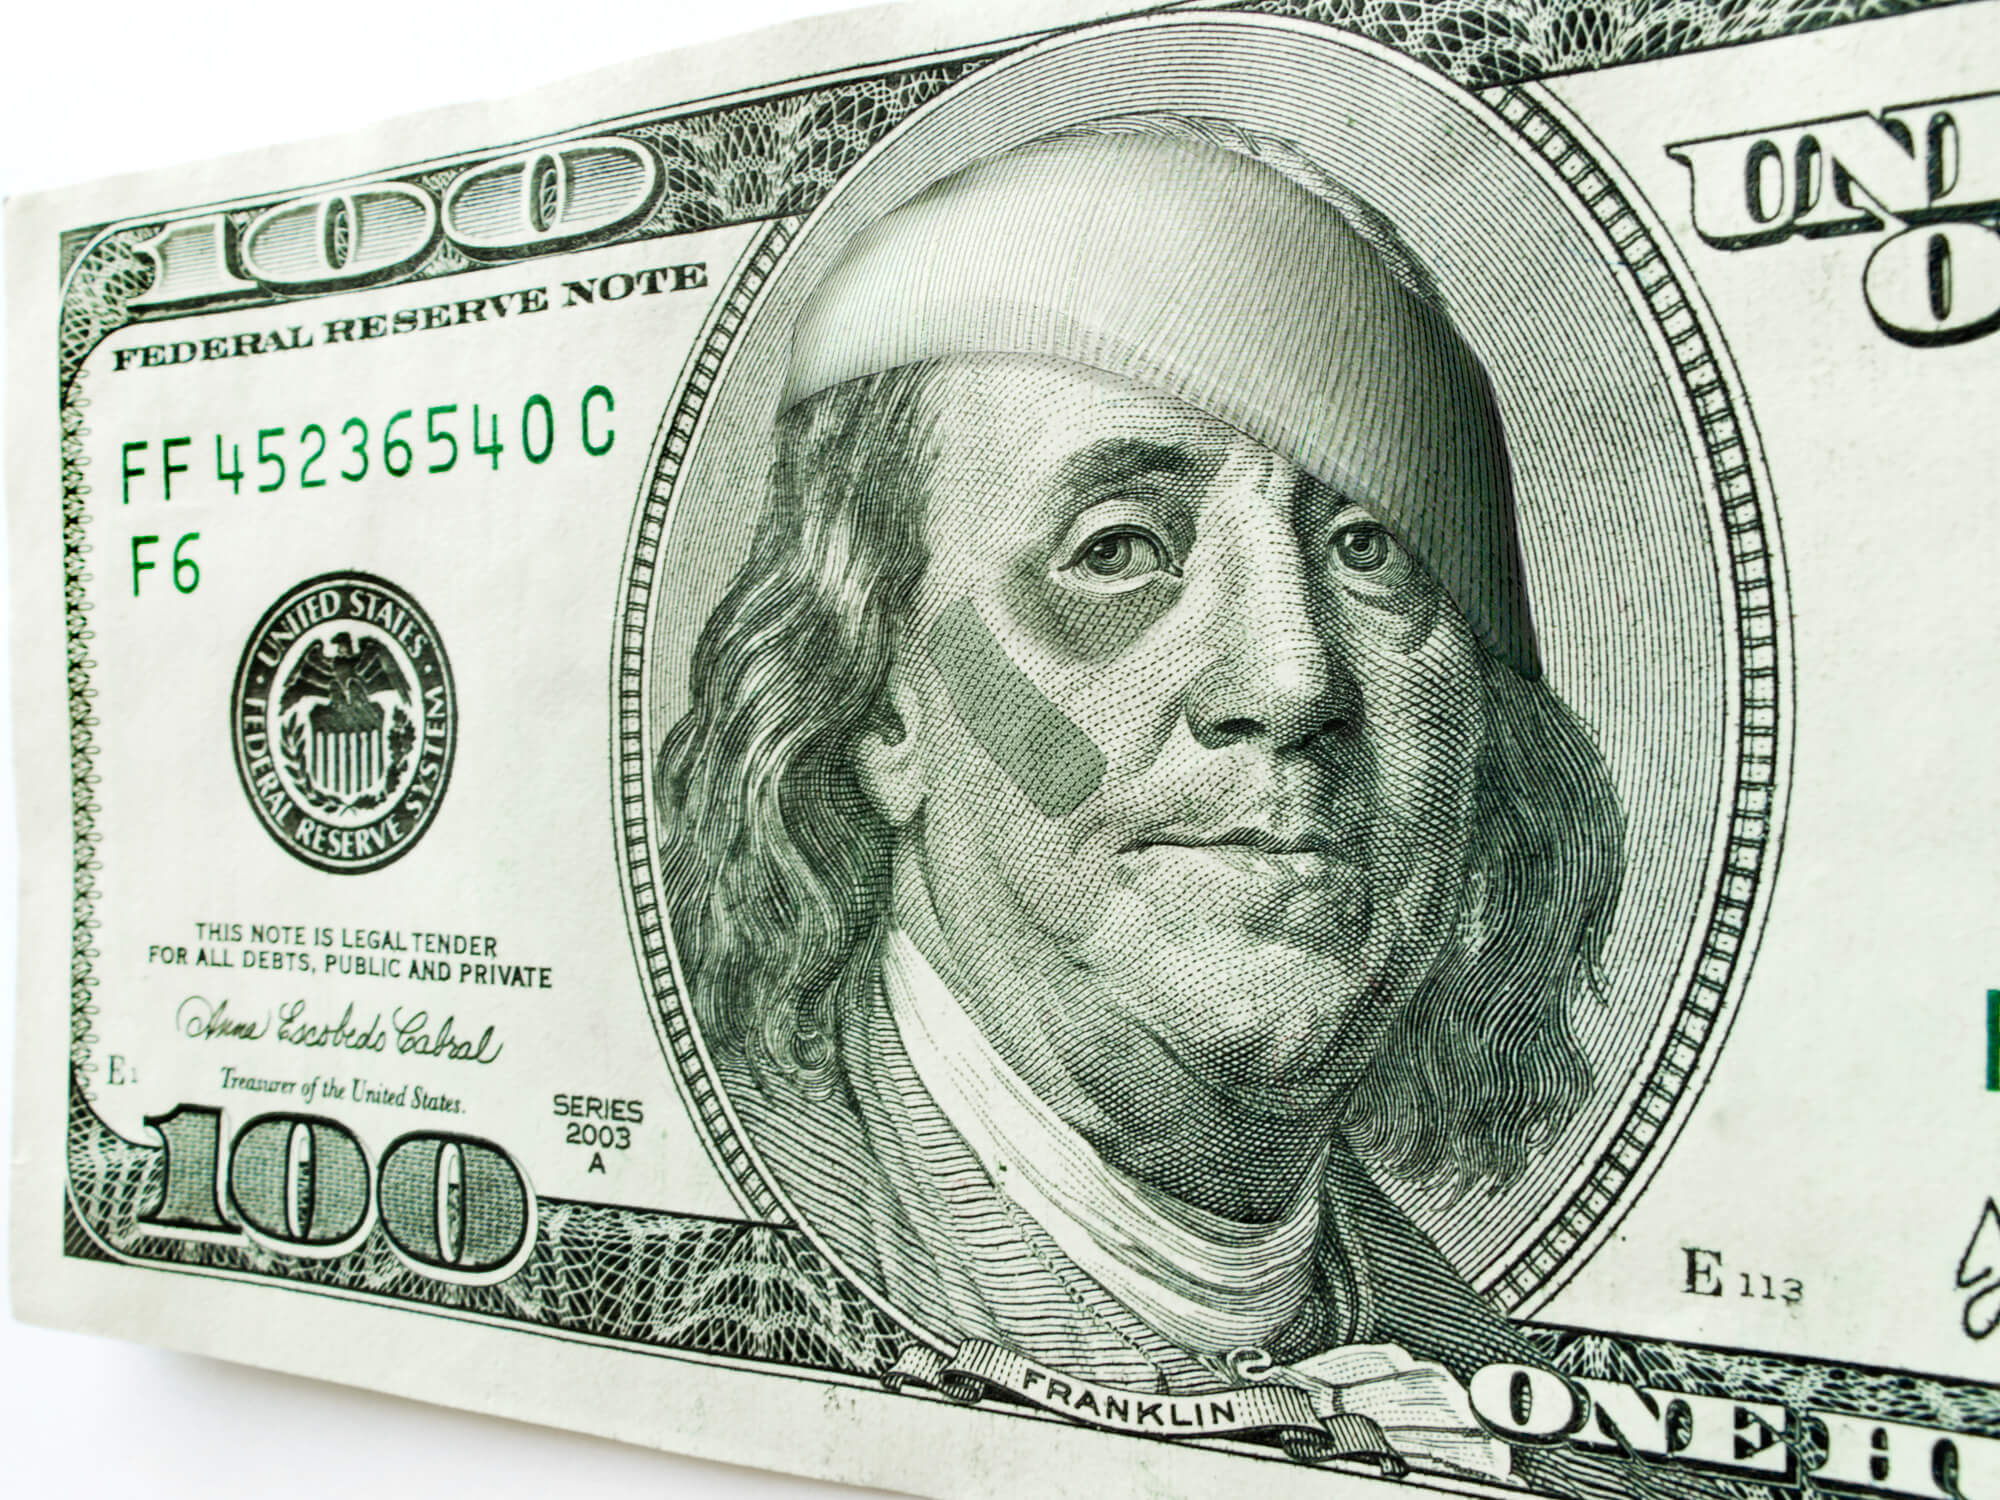 Ben Franklin with black eye and bandages in one-hundred-dollar bill illustrating rising inflation